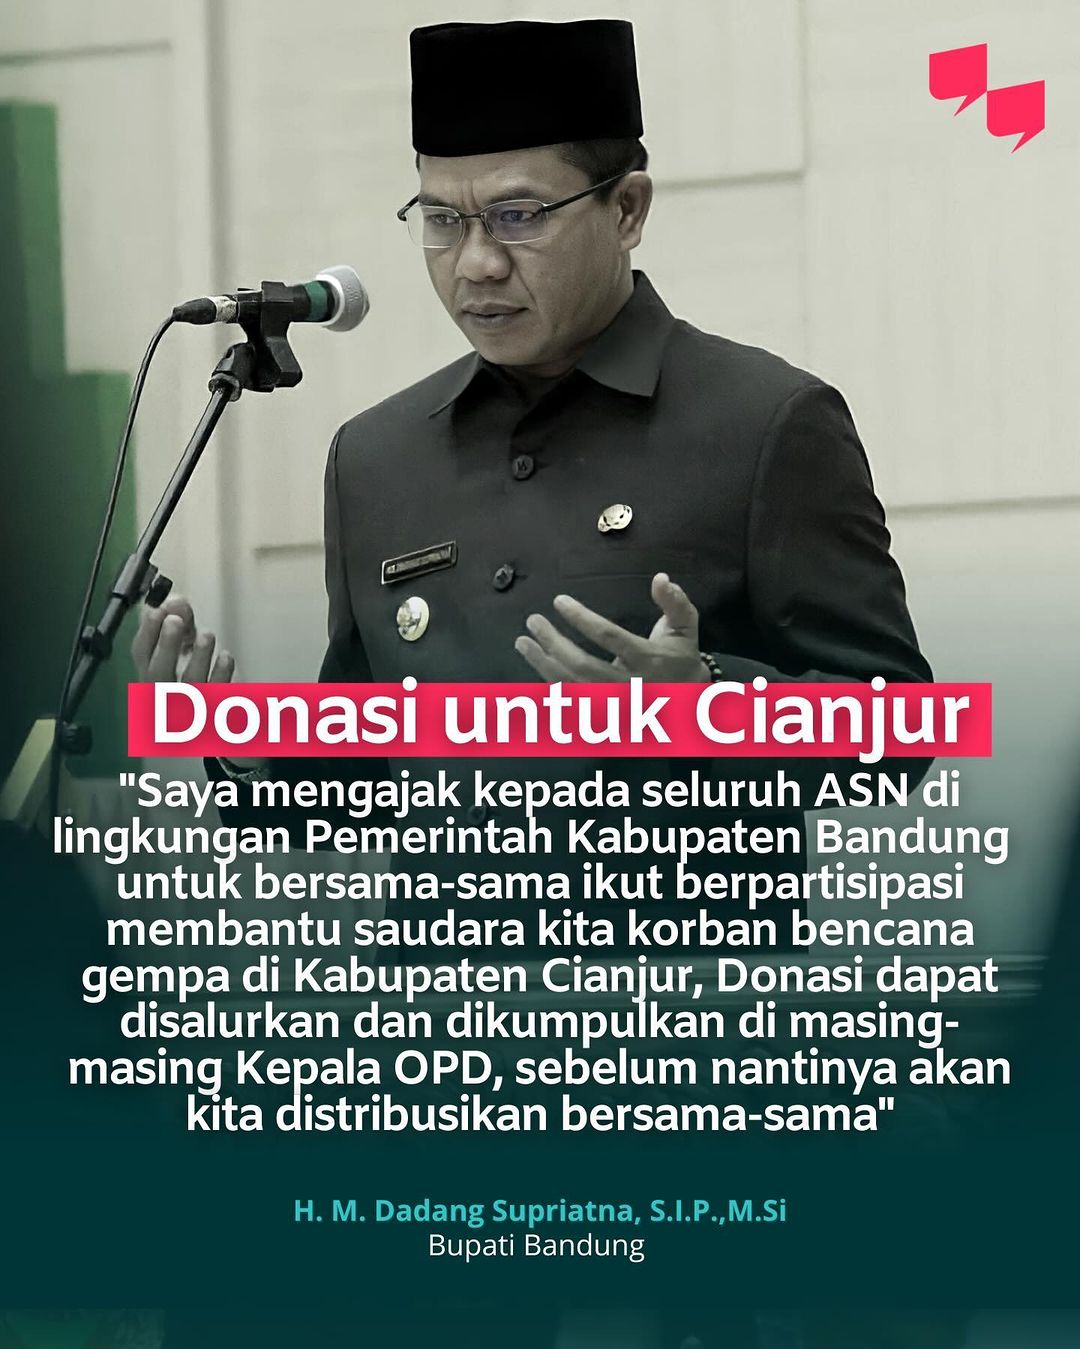 One of the top publications of @dadangsupriatna which has 629 likes and 9 comments